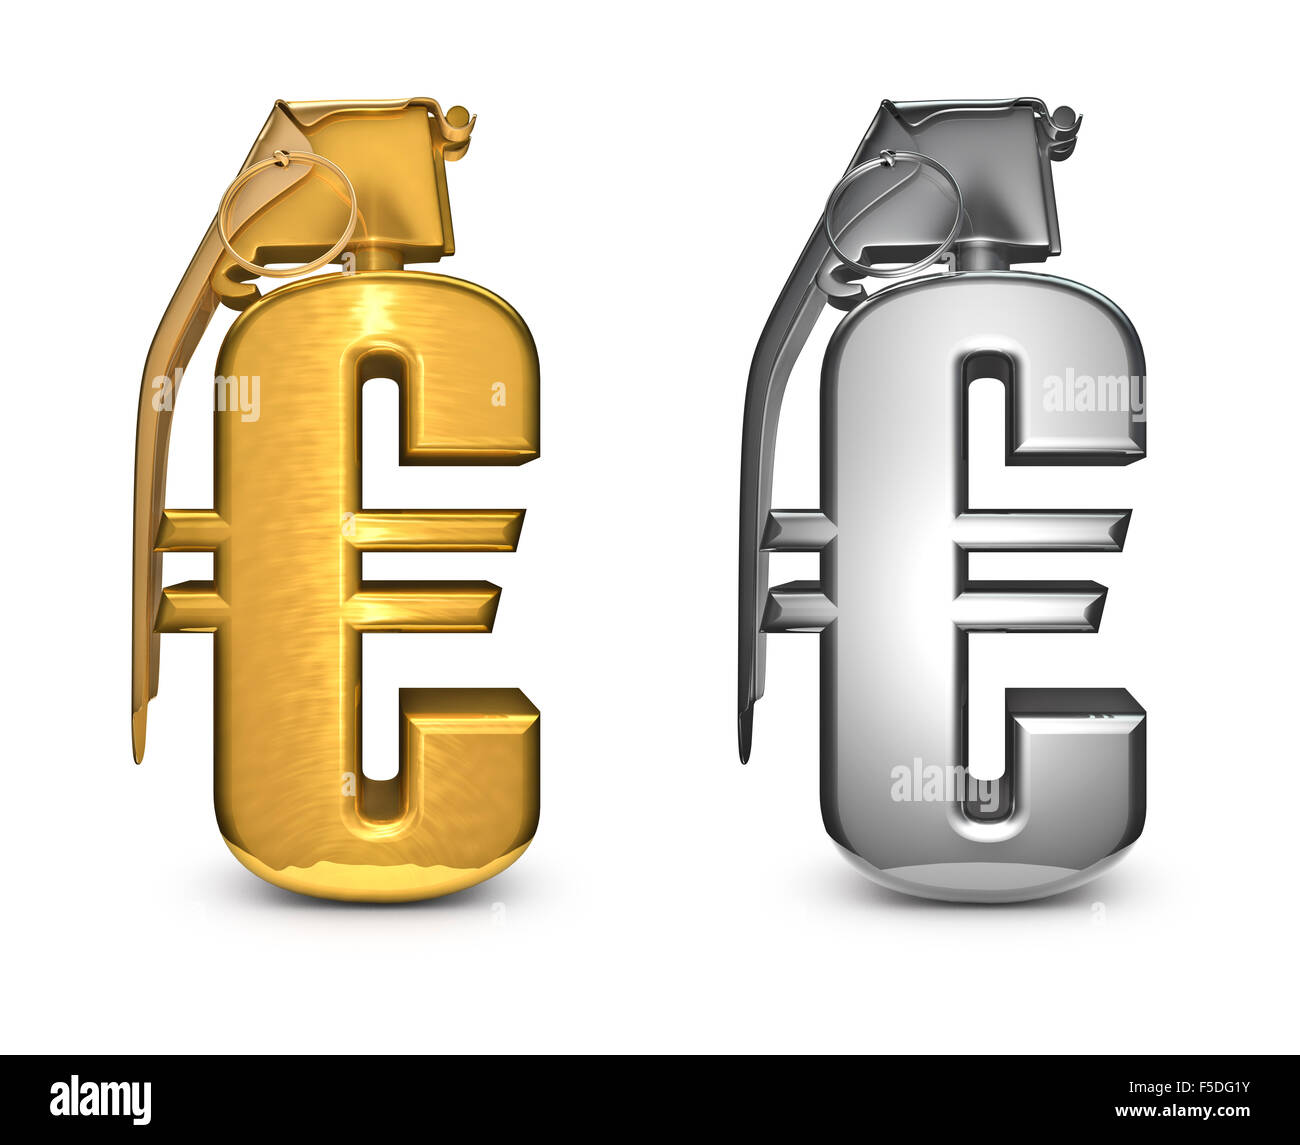 Euro grenade in gold and silver / 3D render of euro symbol grenade Stock Photo